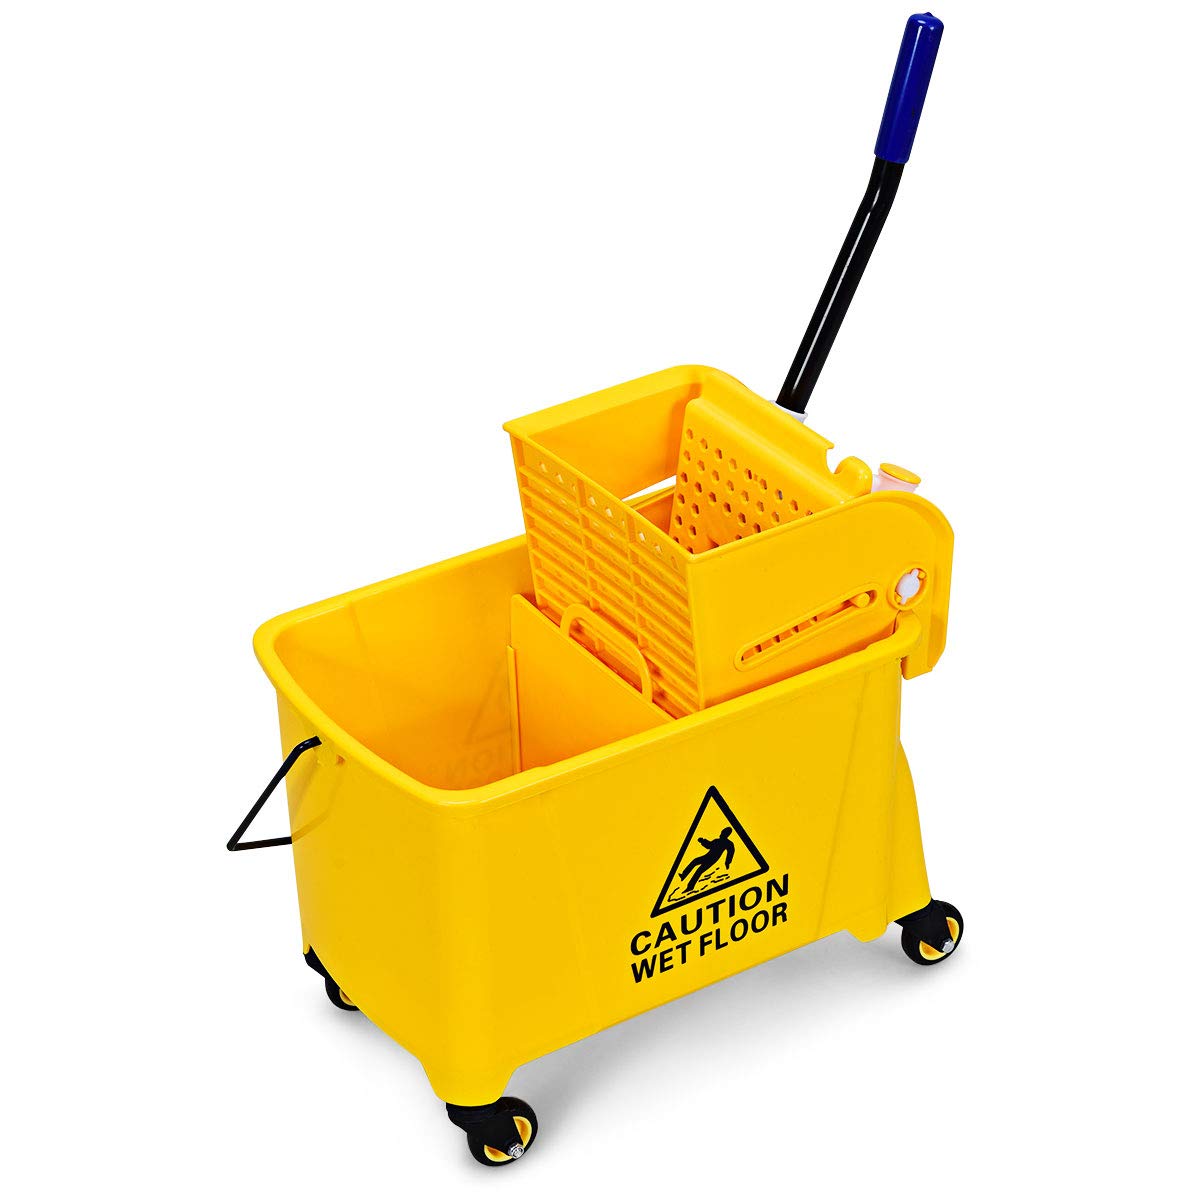 GOPLUS Commercial Mop Bucket with Wringer, Household Portable Mop Bucket, Ideal for Household and Public Places Floor - GoplusUS